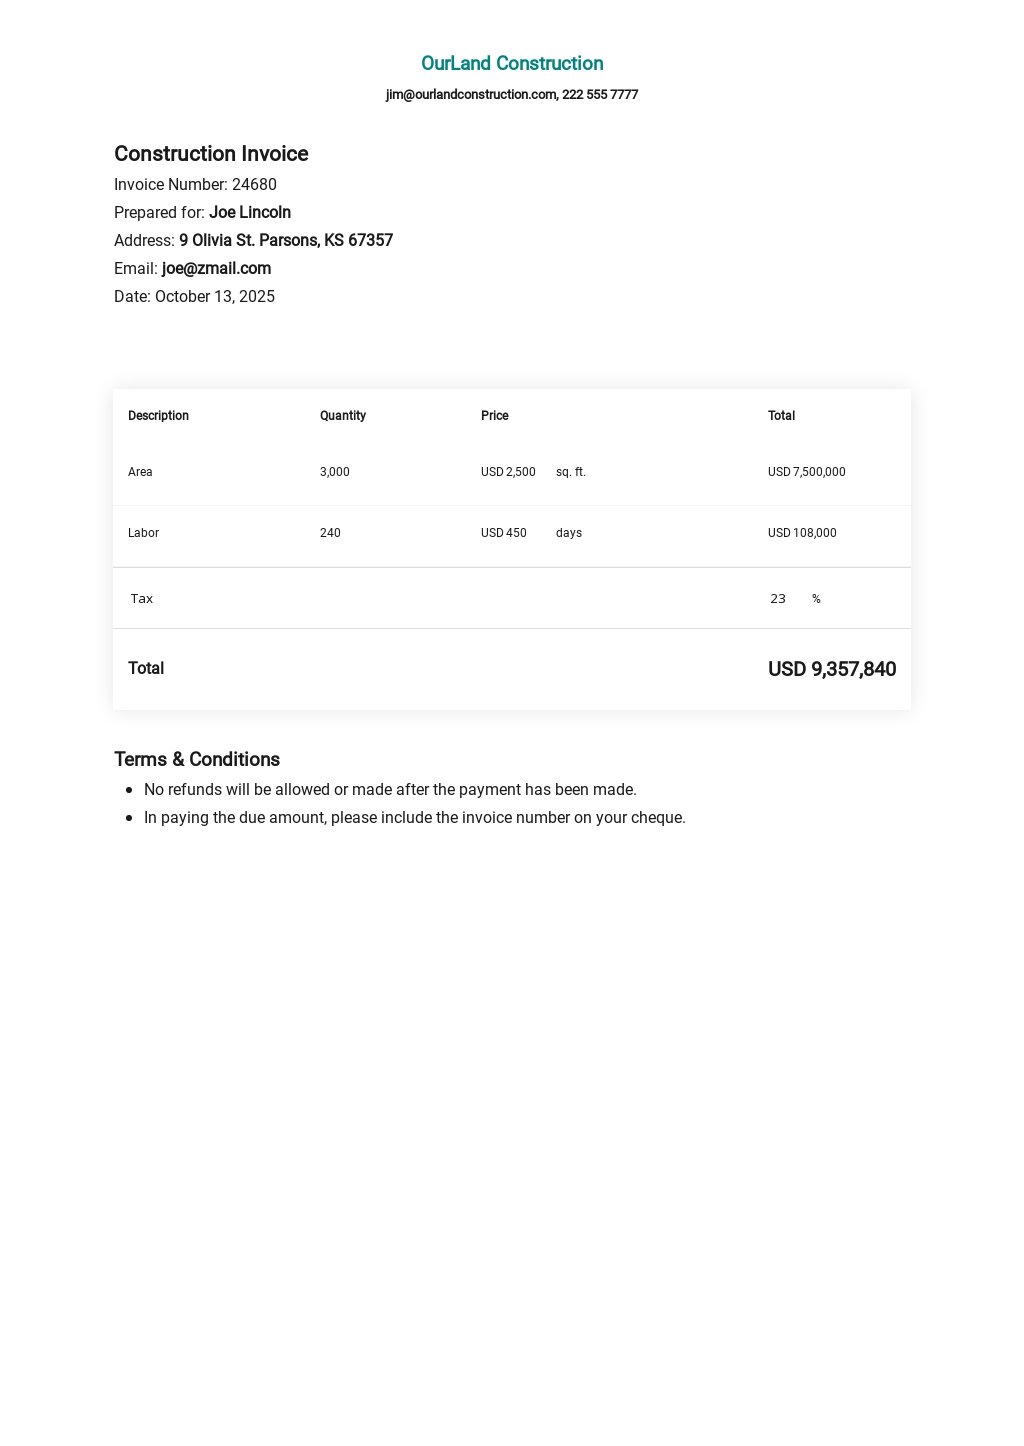 FREE Construction Invoice Template in Microsoft Word (DOC)